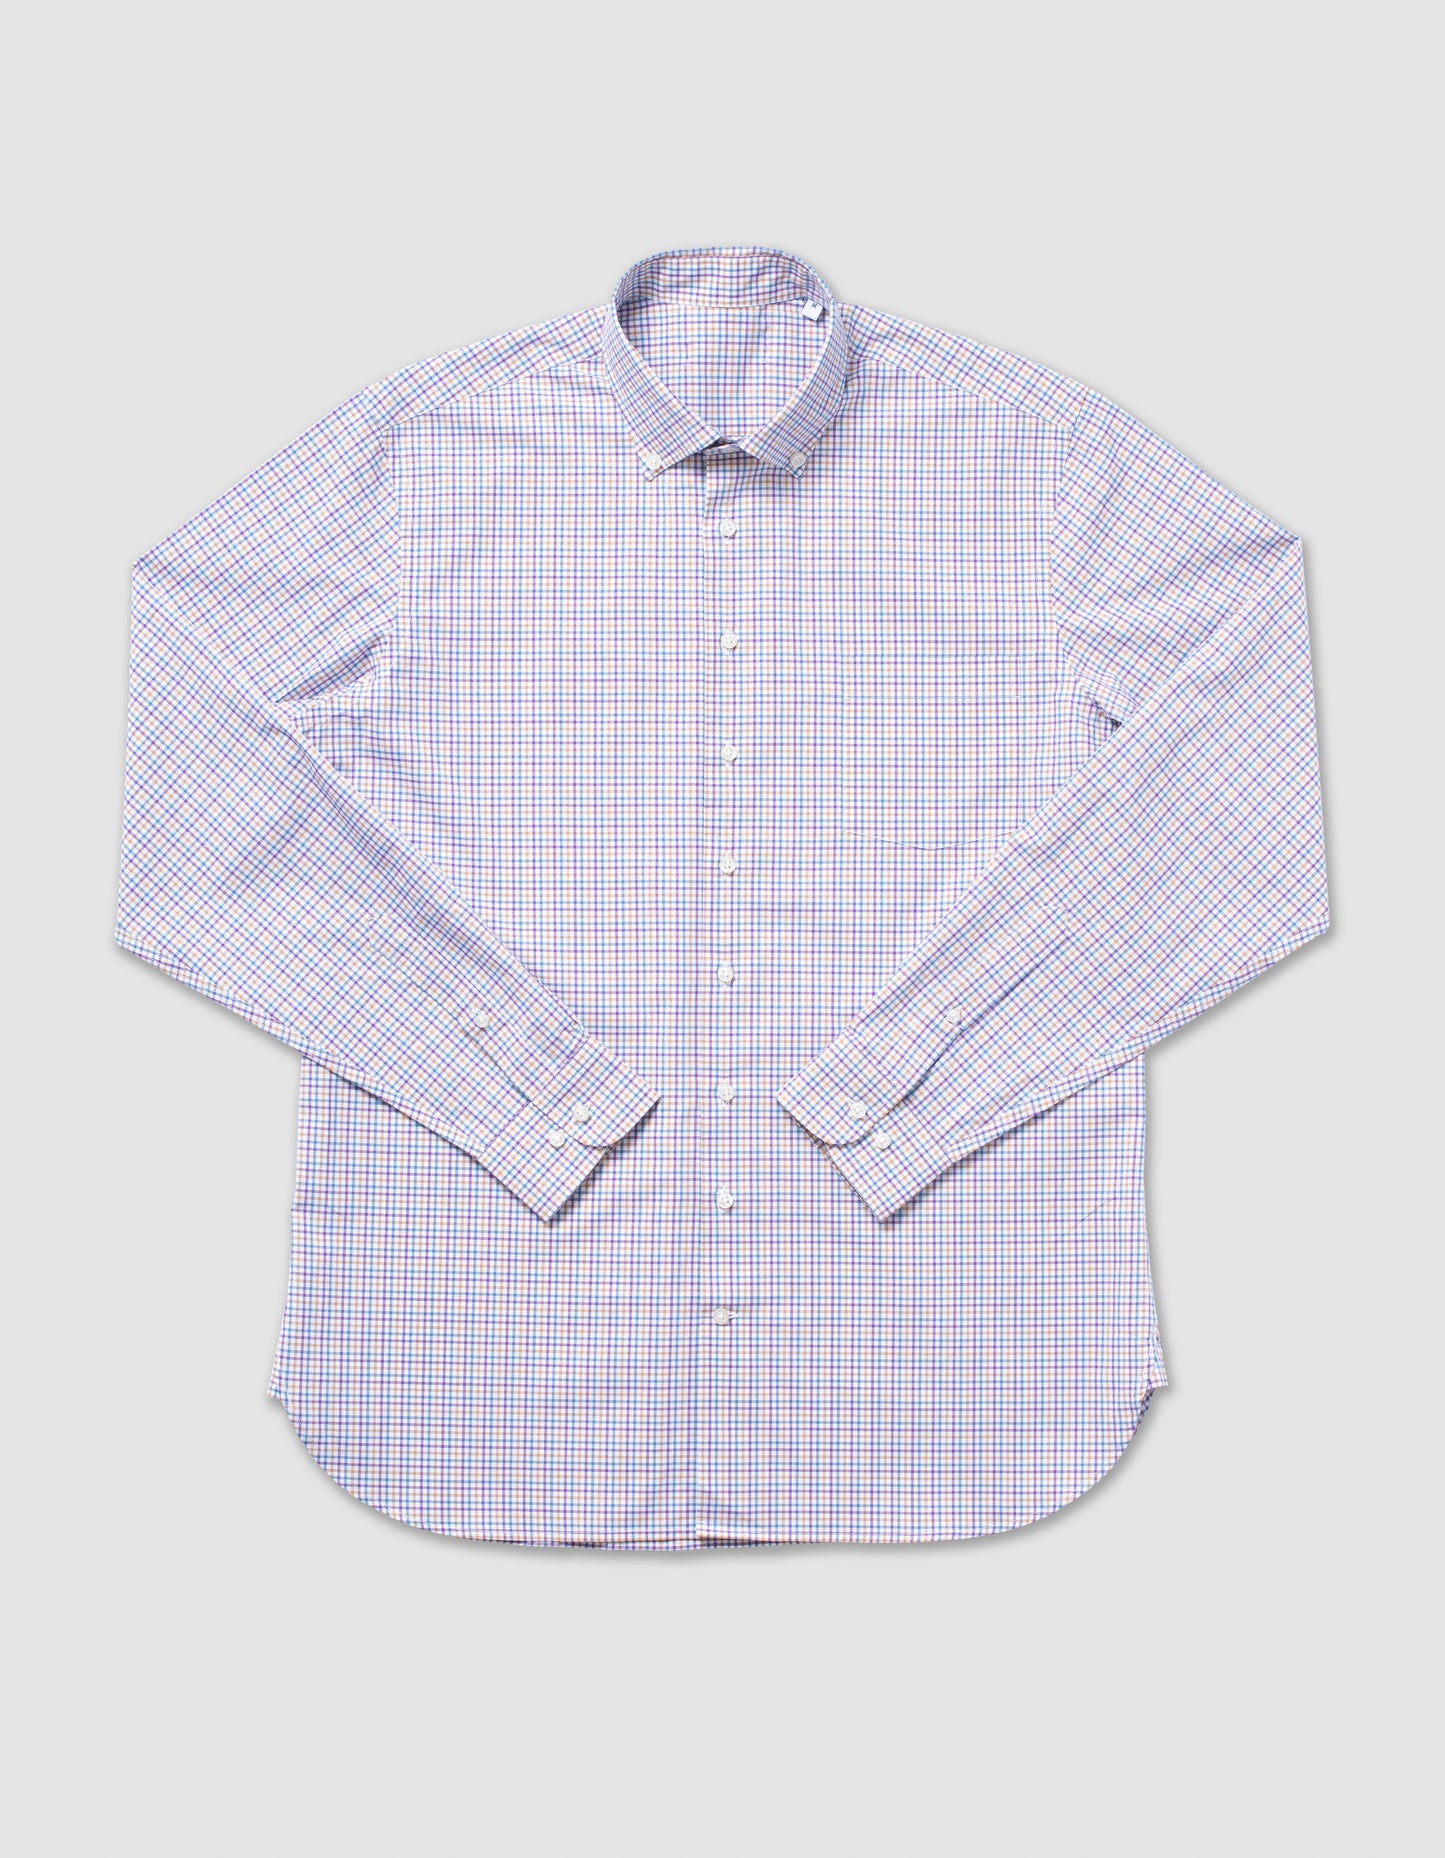 COTTON LONG SLEEVE TATTERSALL SHIRT - MULTI COLOR